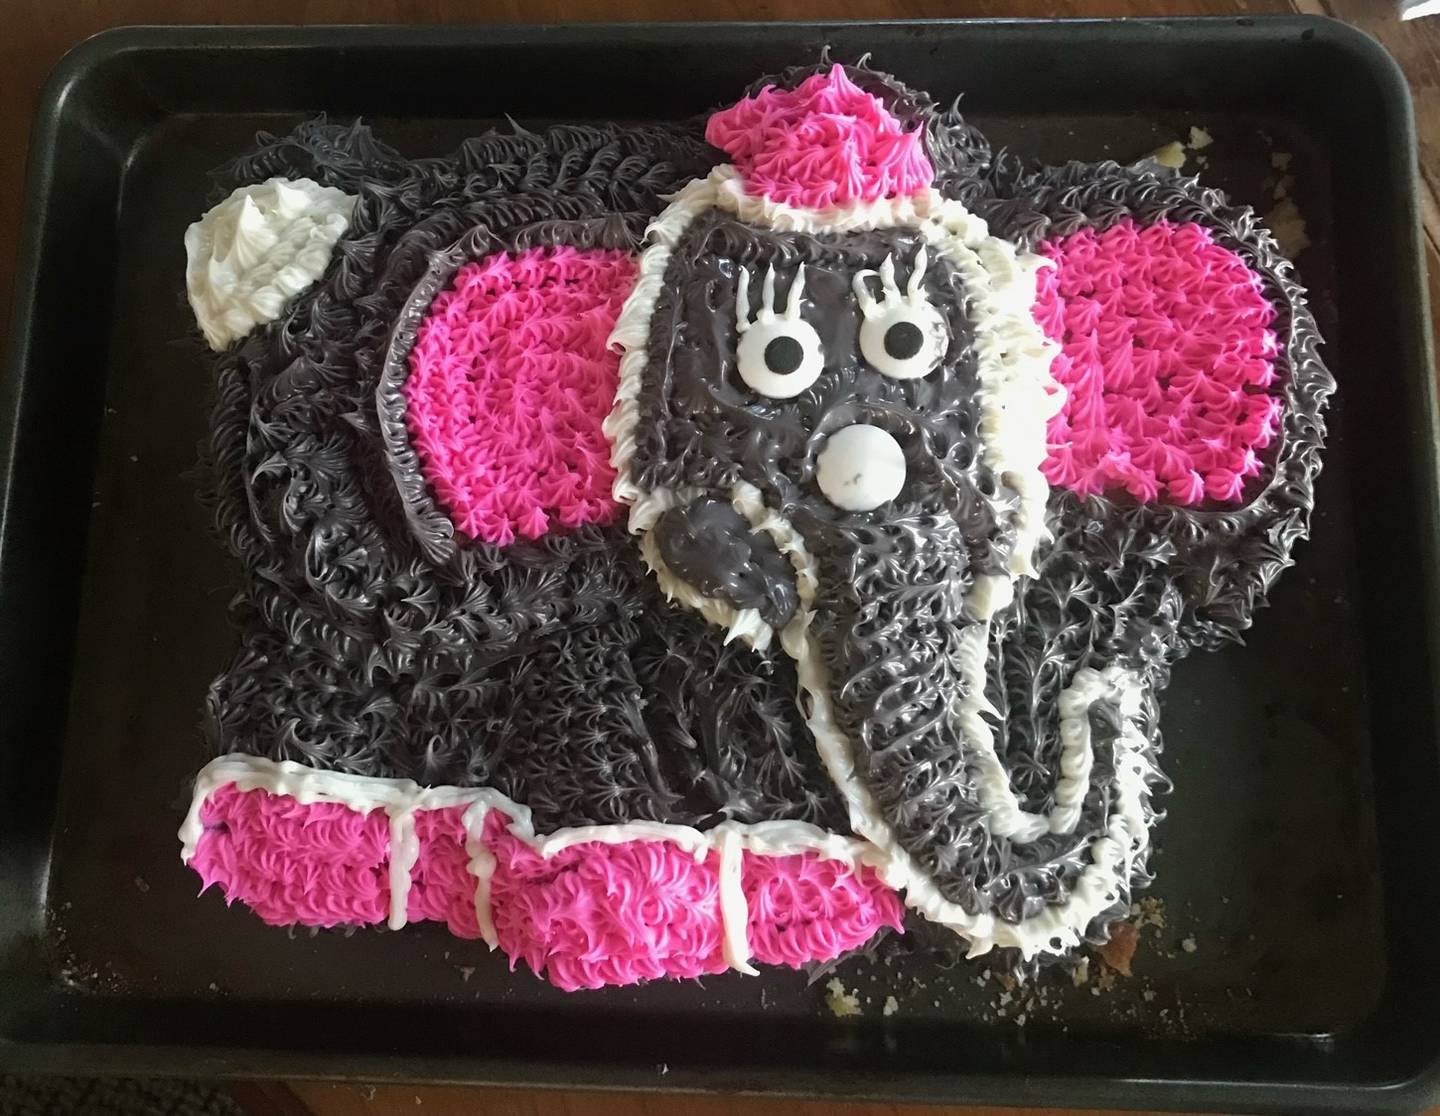 Elephant cake decorated and baked by Graham.